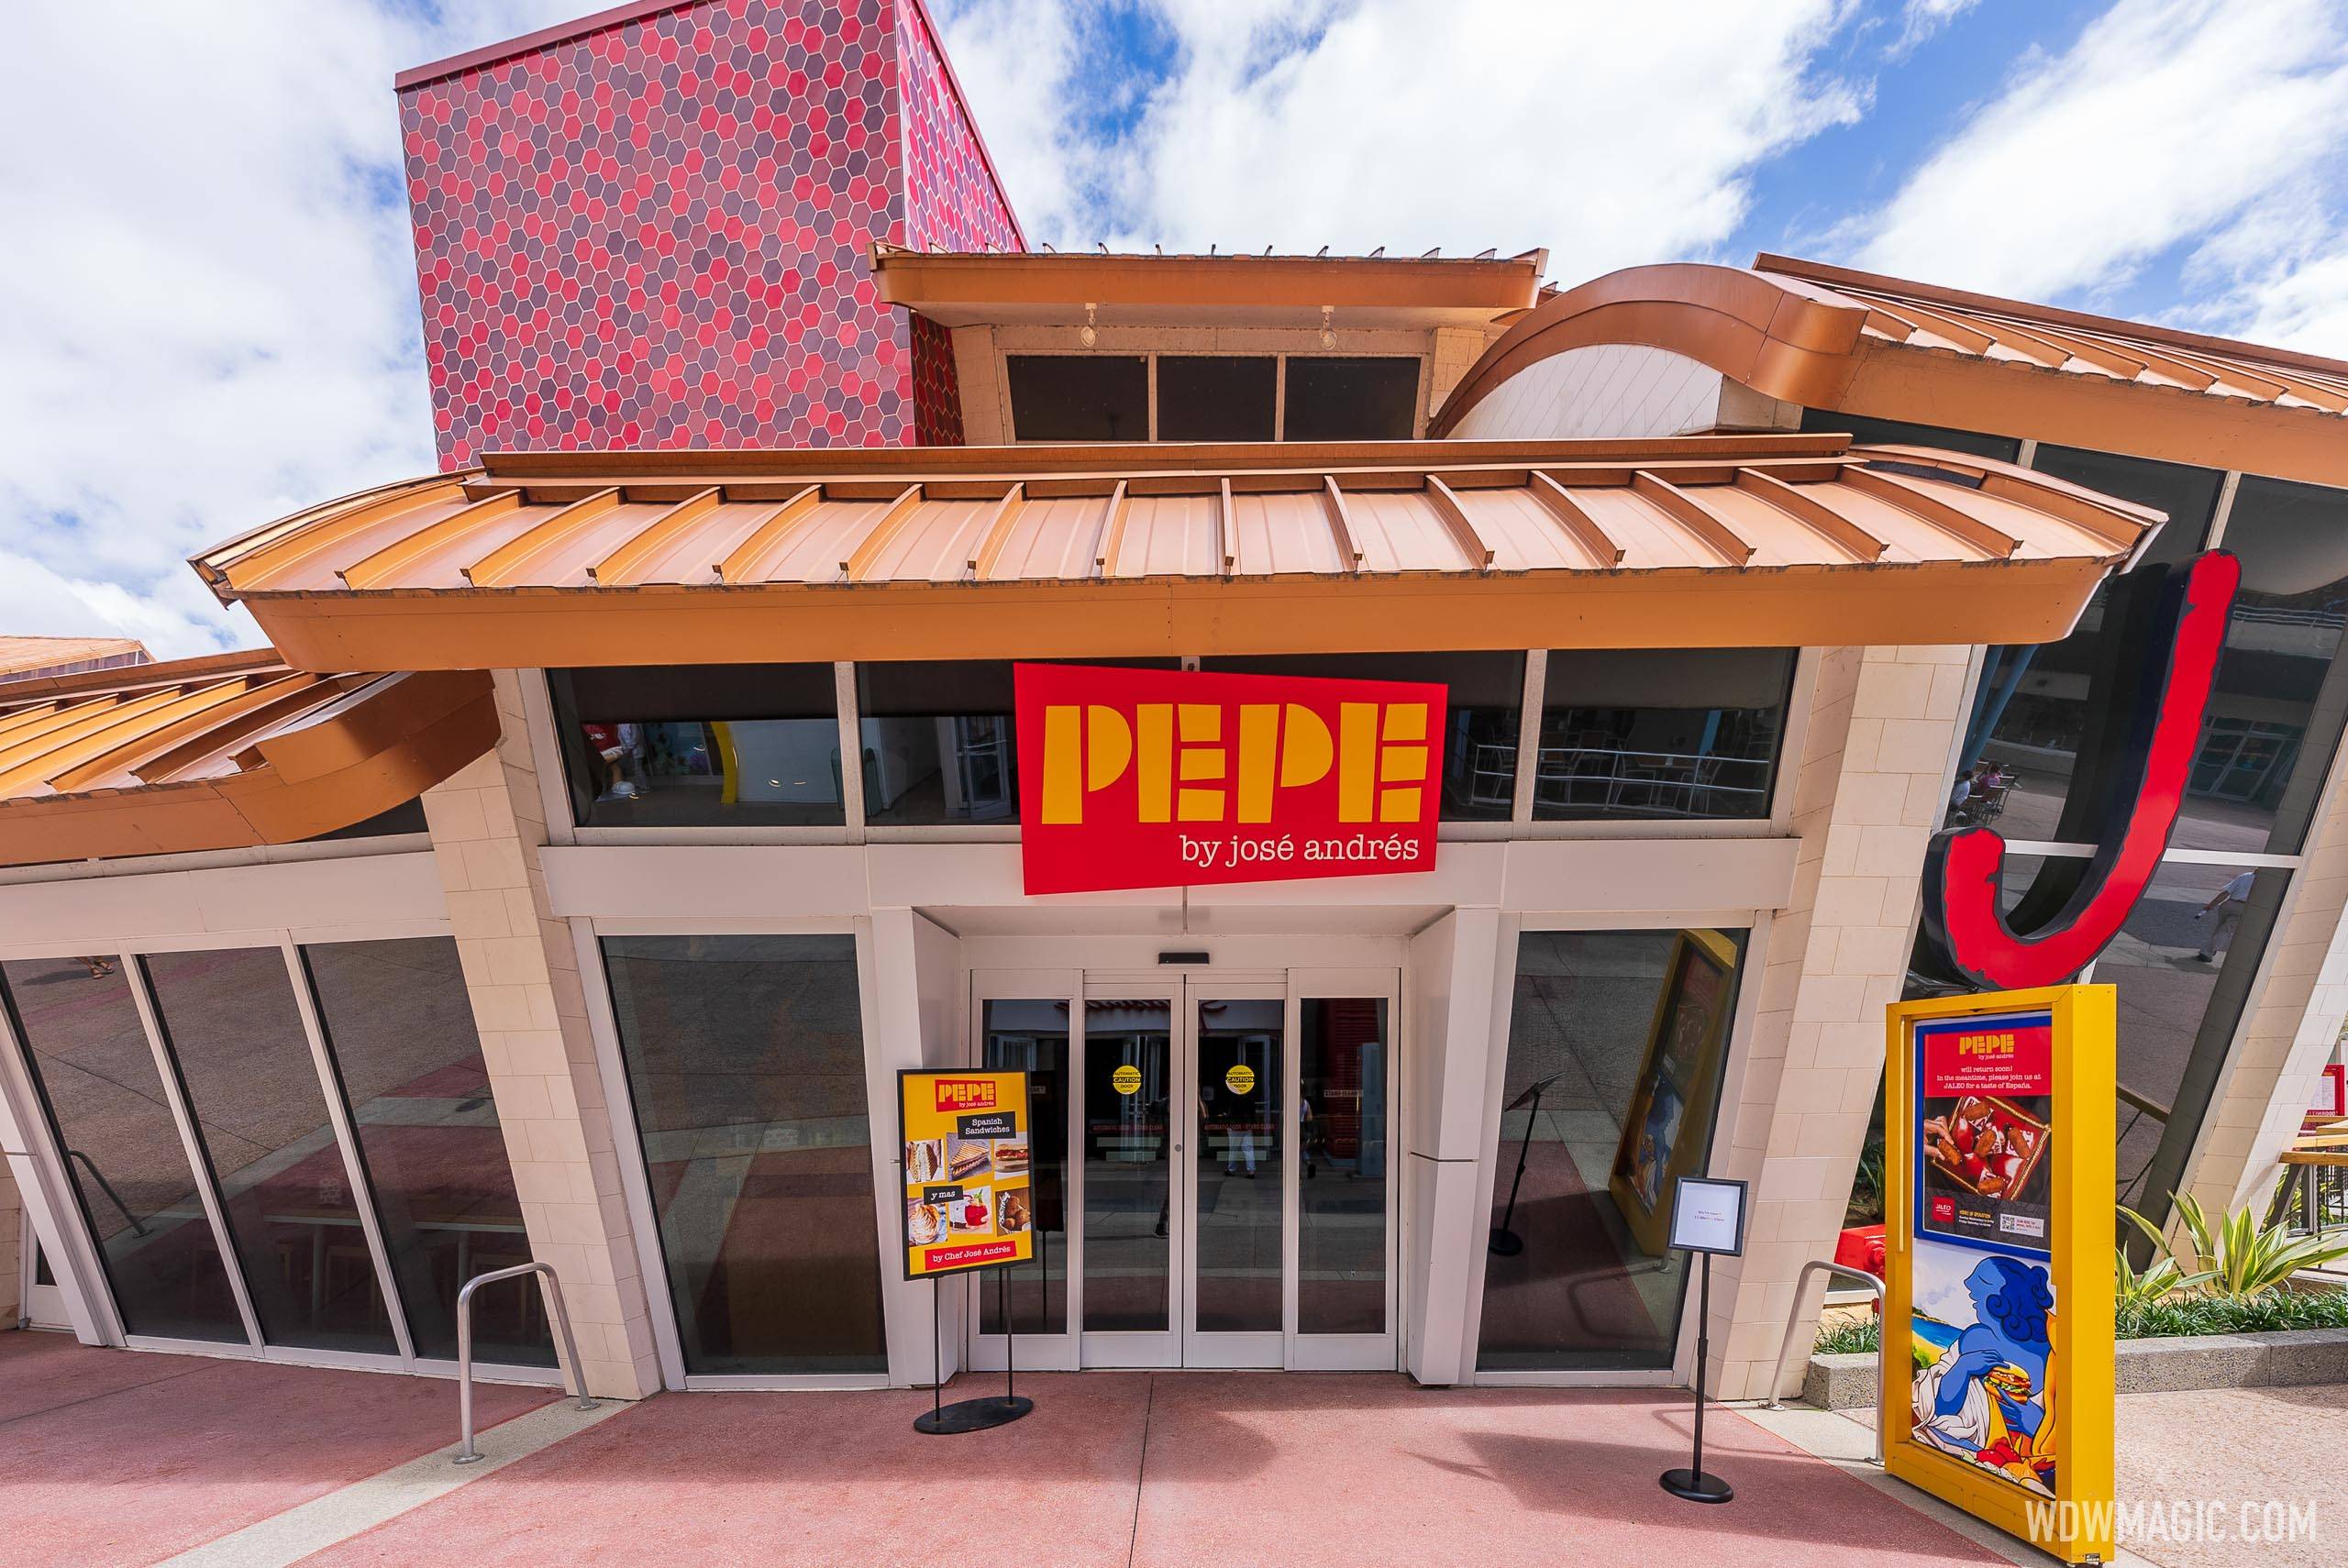 Limited-time half-priced sangrias deal at Pepe by José Andrés in Disney Springs